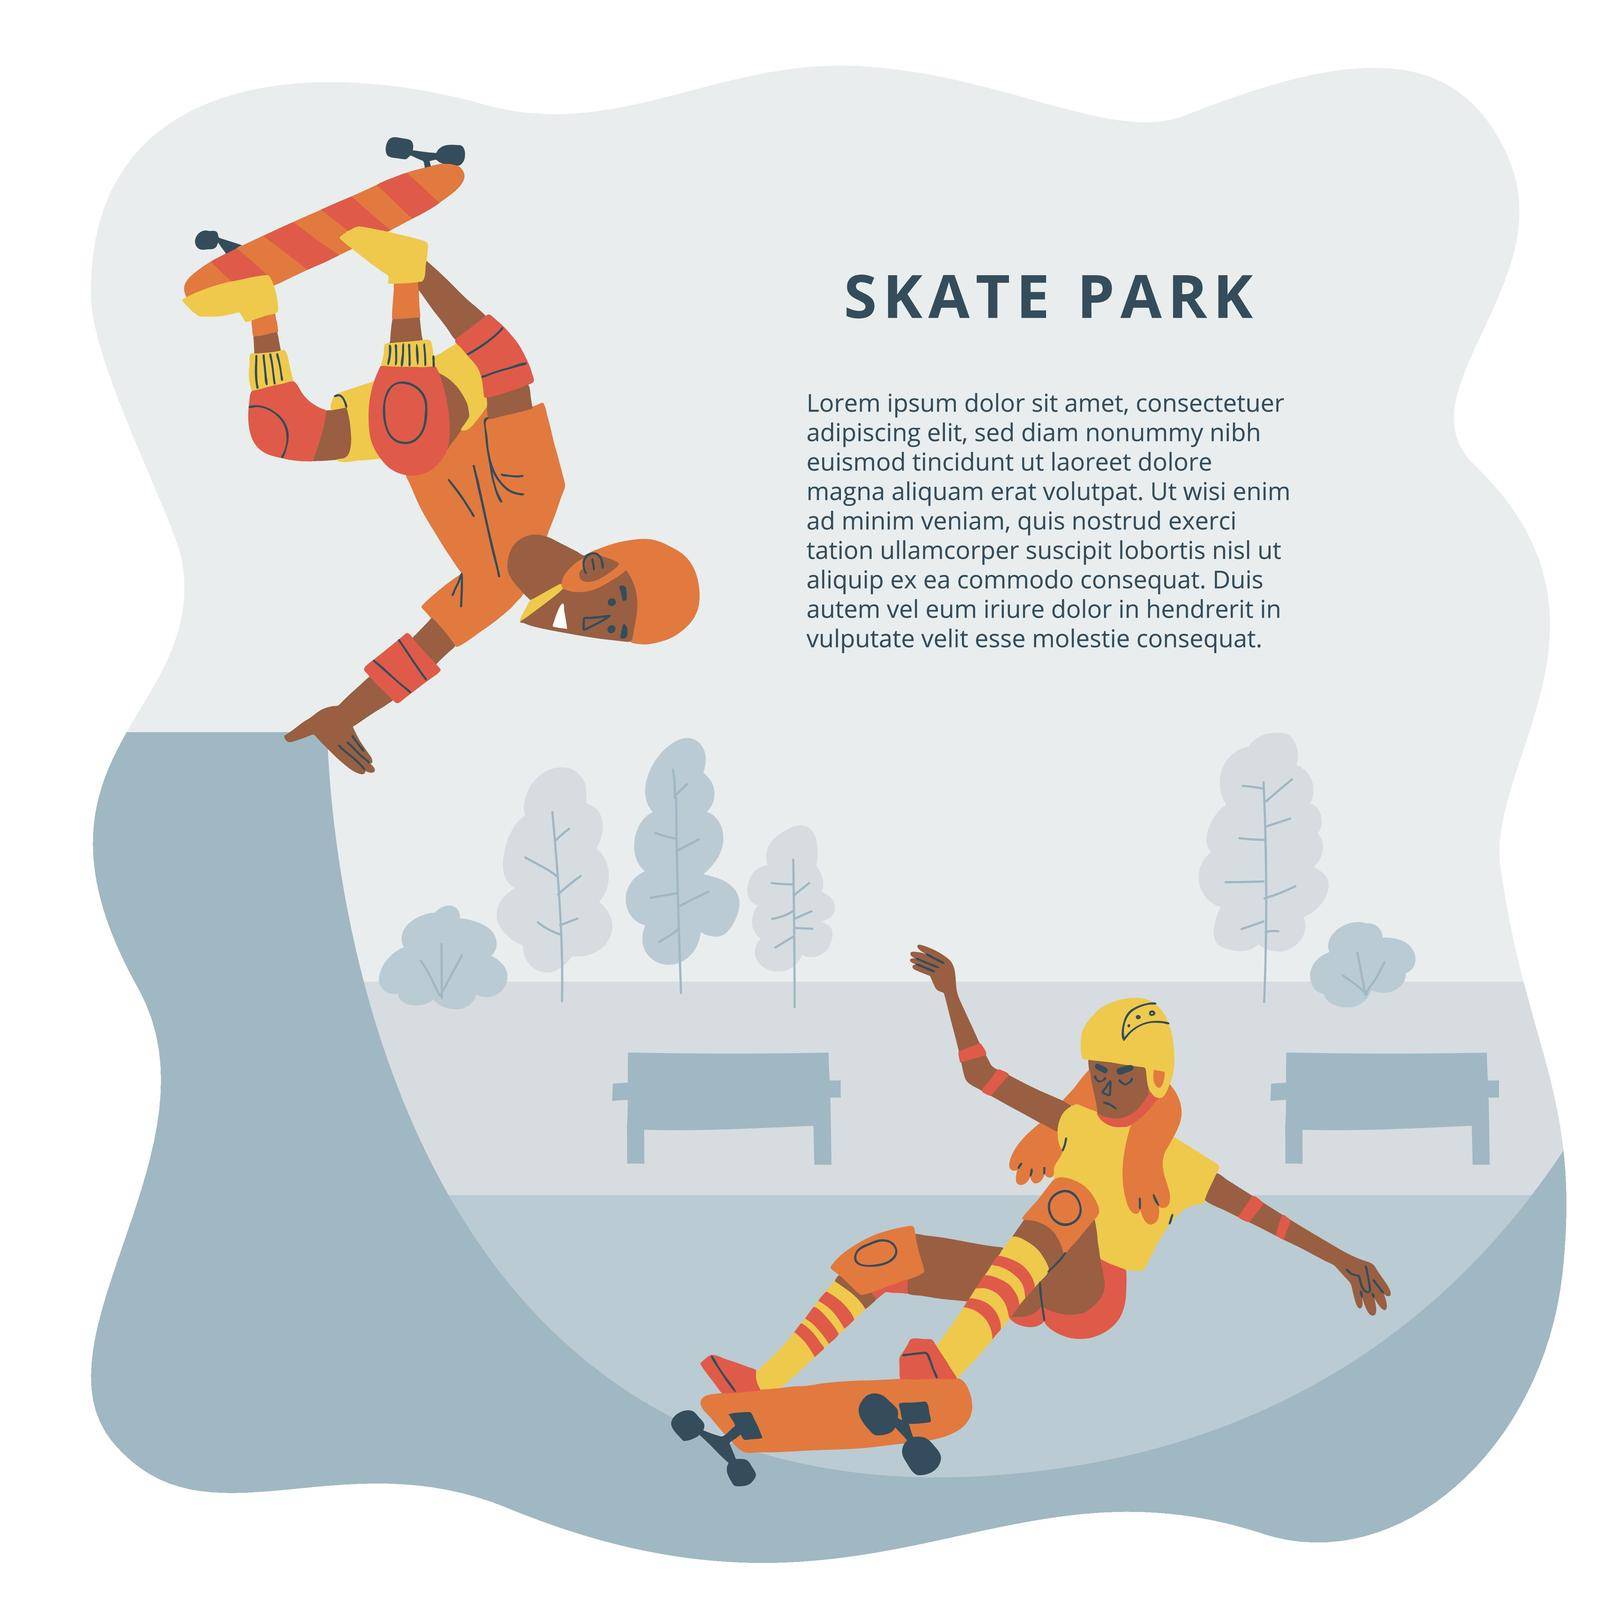 Skateboarding colorful illustration of skater teens jumping on ramp. Skate park, shop, school advertising template with space for text.